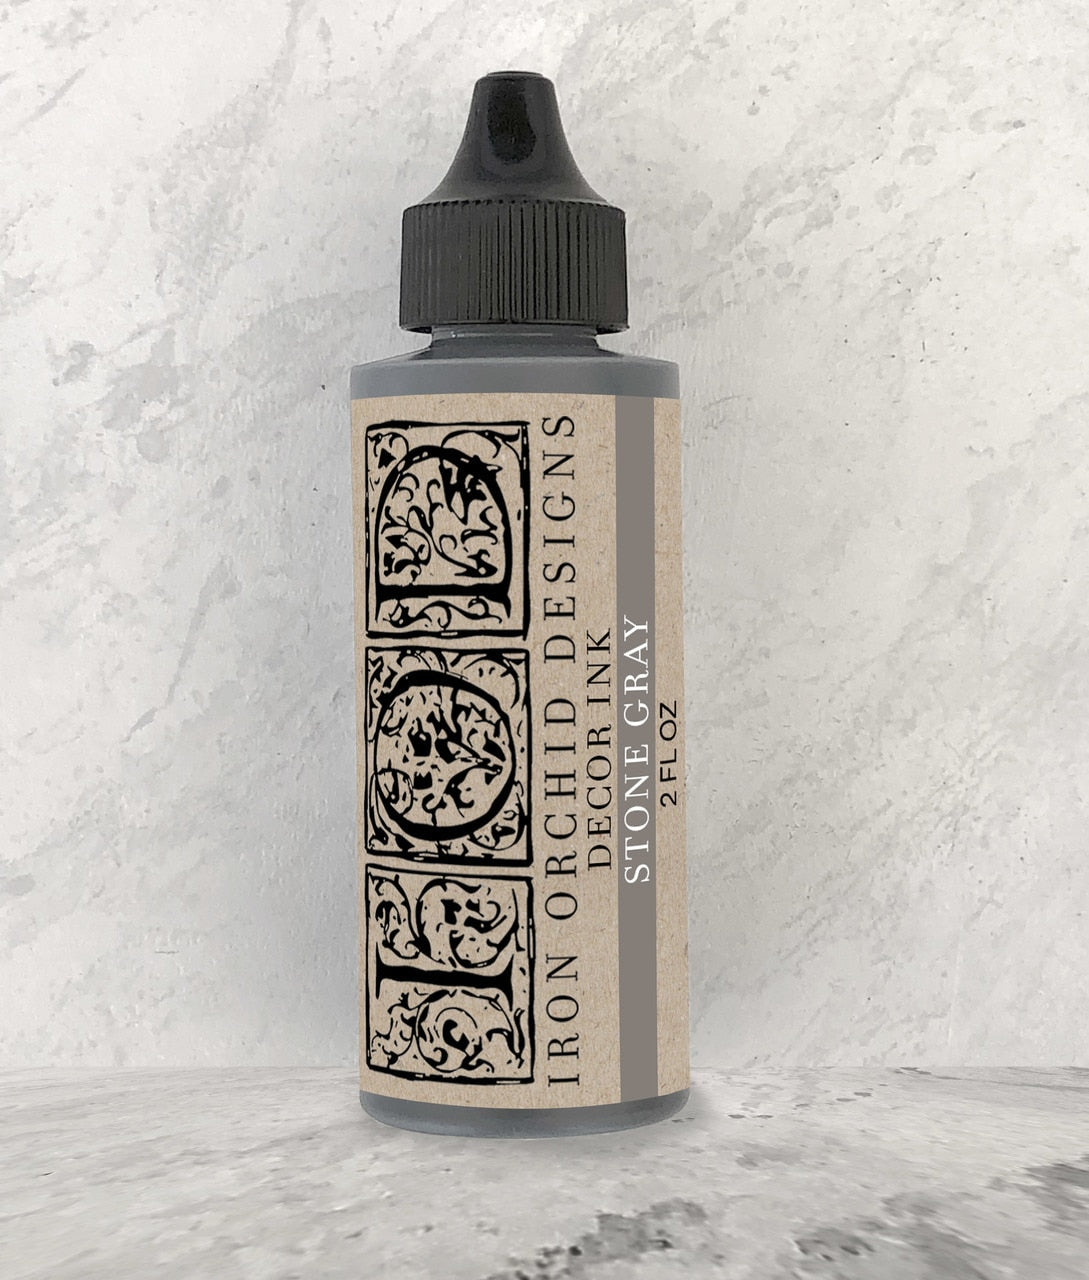 Decor Ink Stone Gray 2 oz - The Weathered Shed